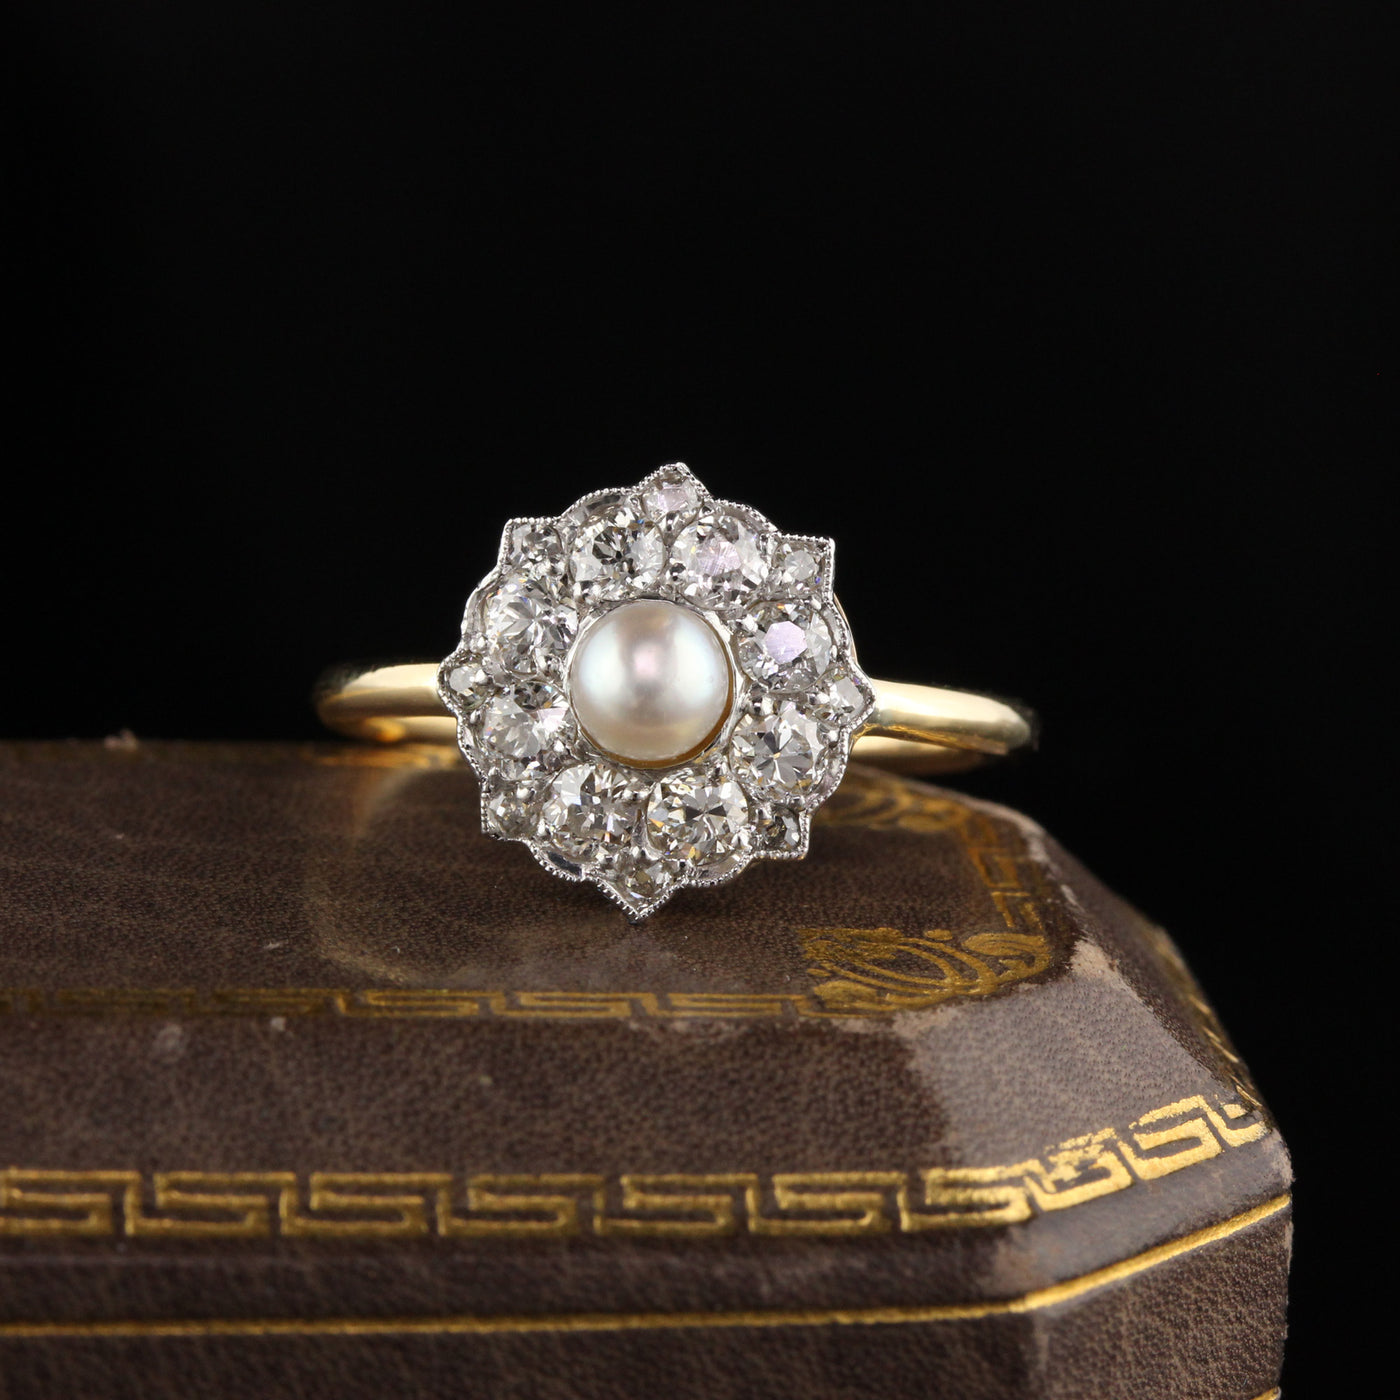 Antique Victorian 18K Yellow Gold Old Euro Cut Diamond and Pearl Engagement Ring